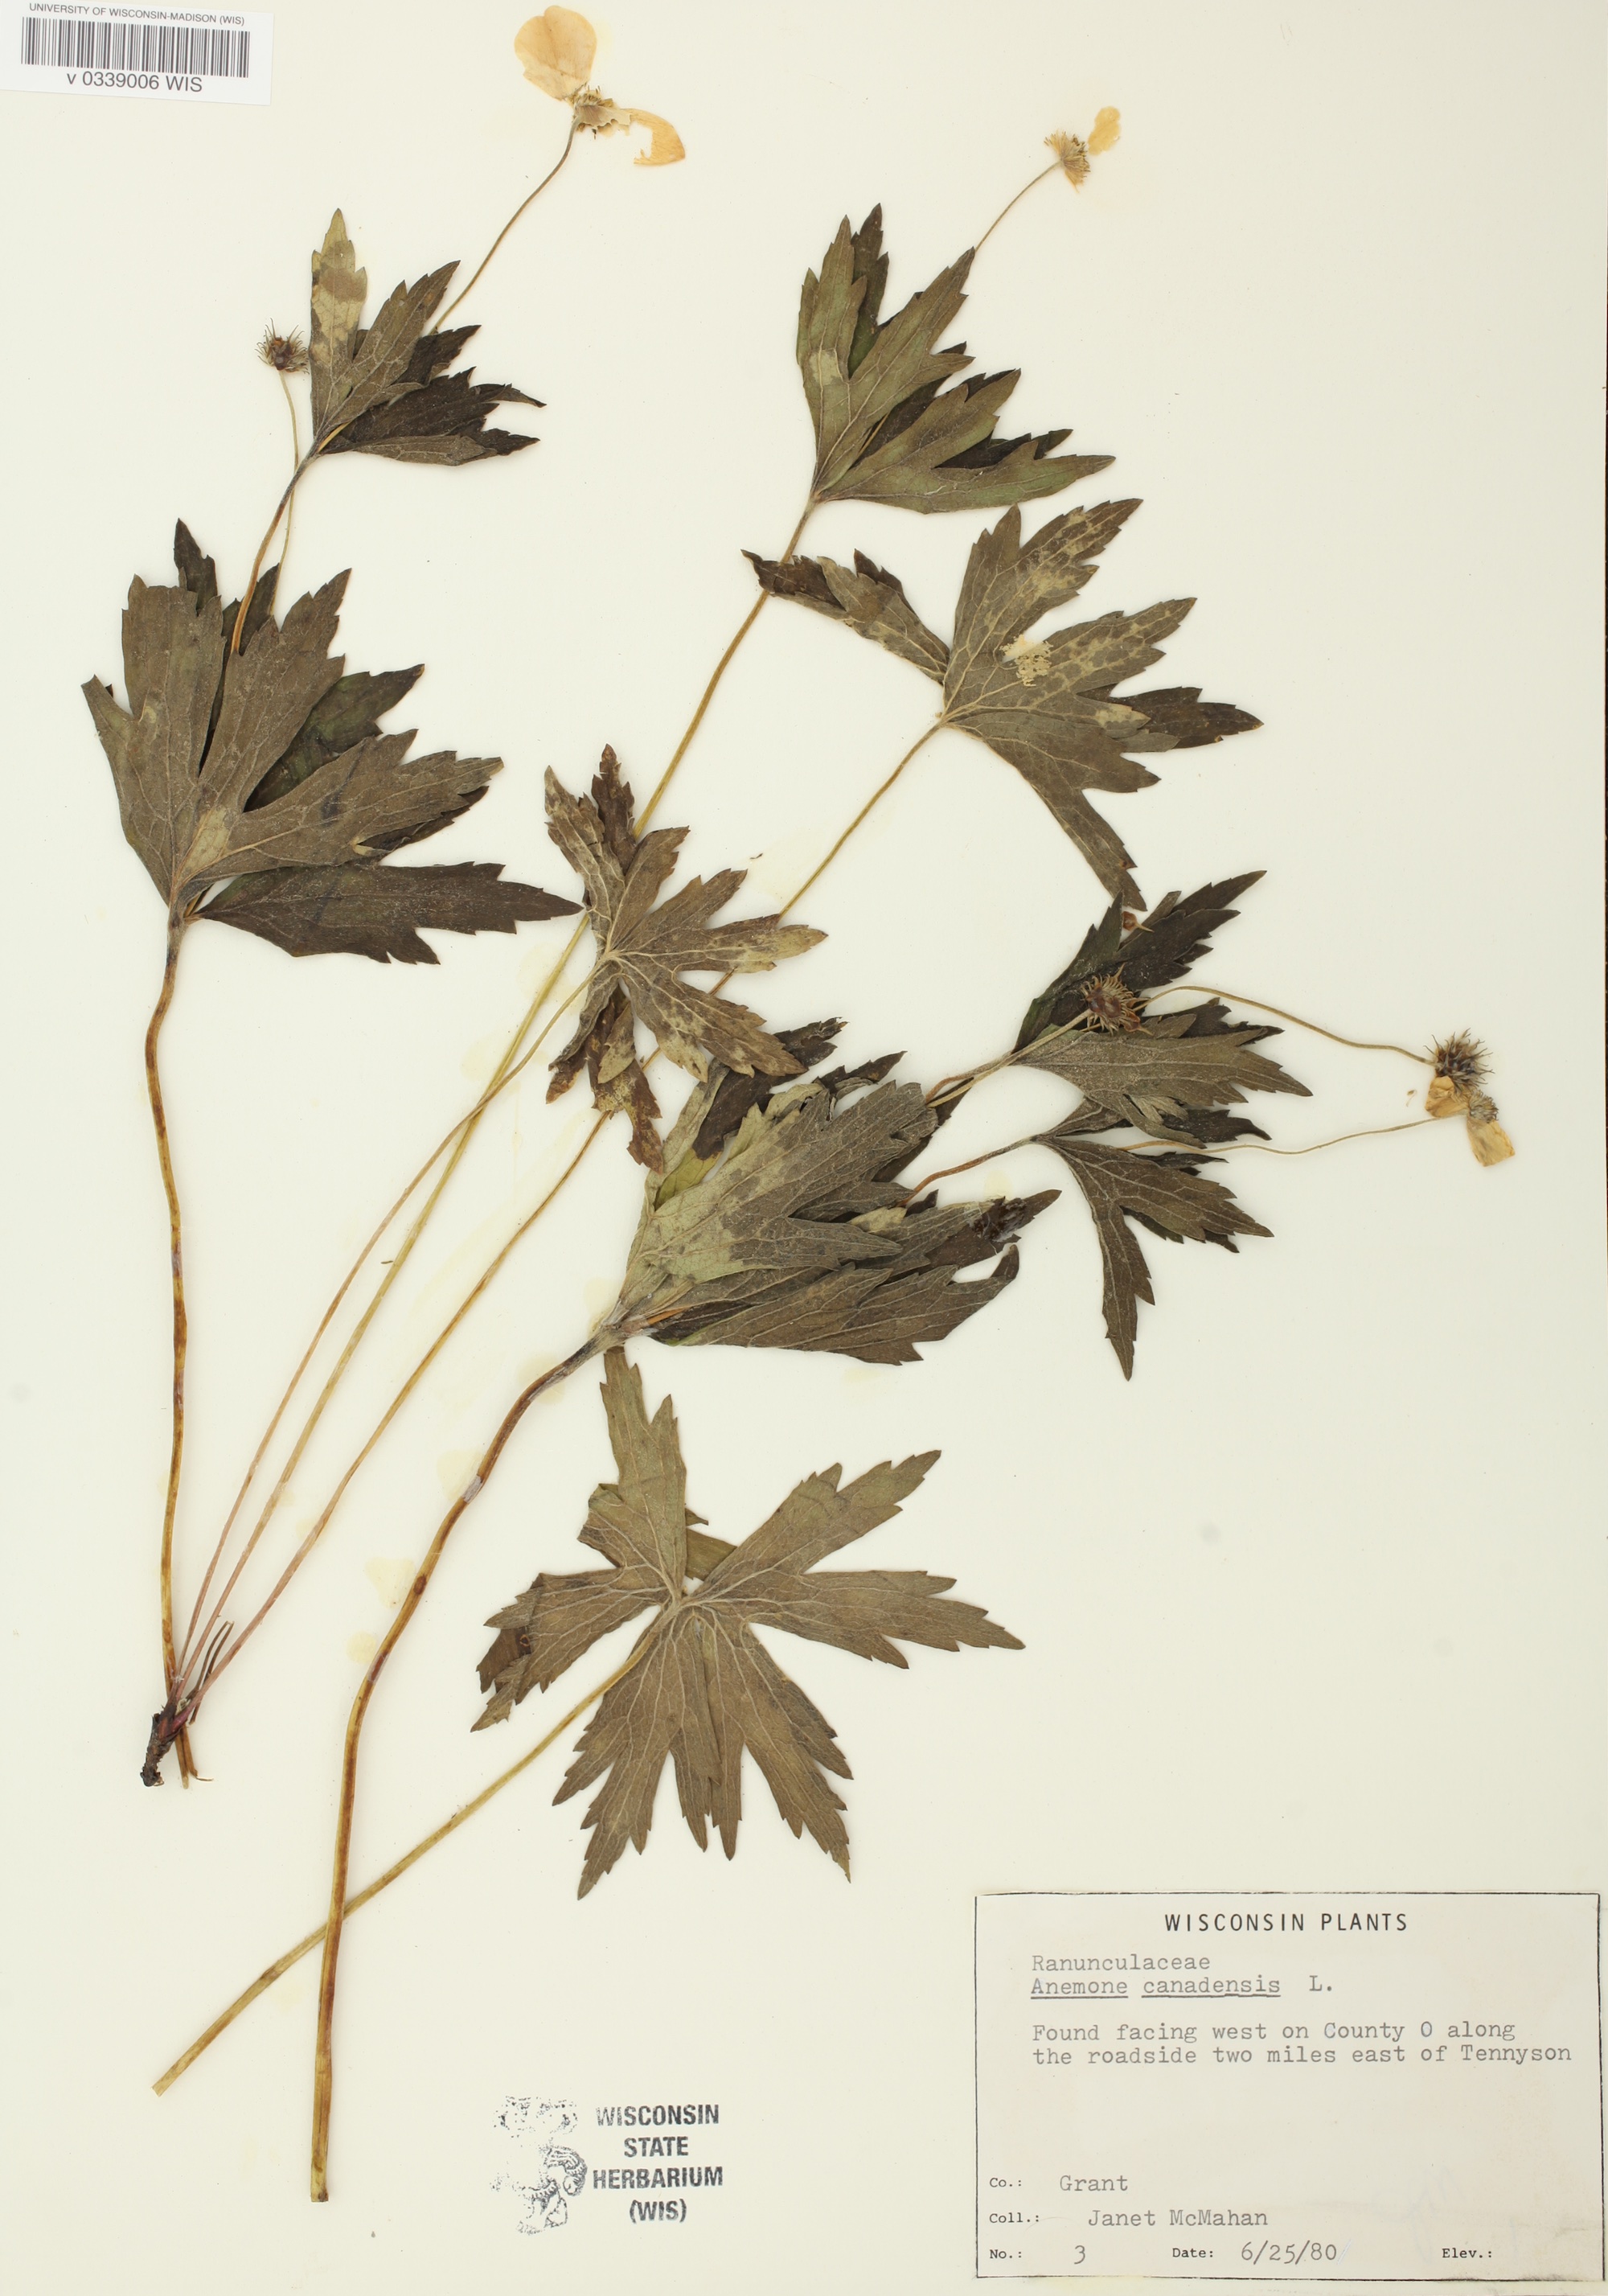 Specimen photo of Anemone canadensis that was collected two miles east of Tenneyson, Wisconsin.